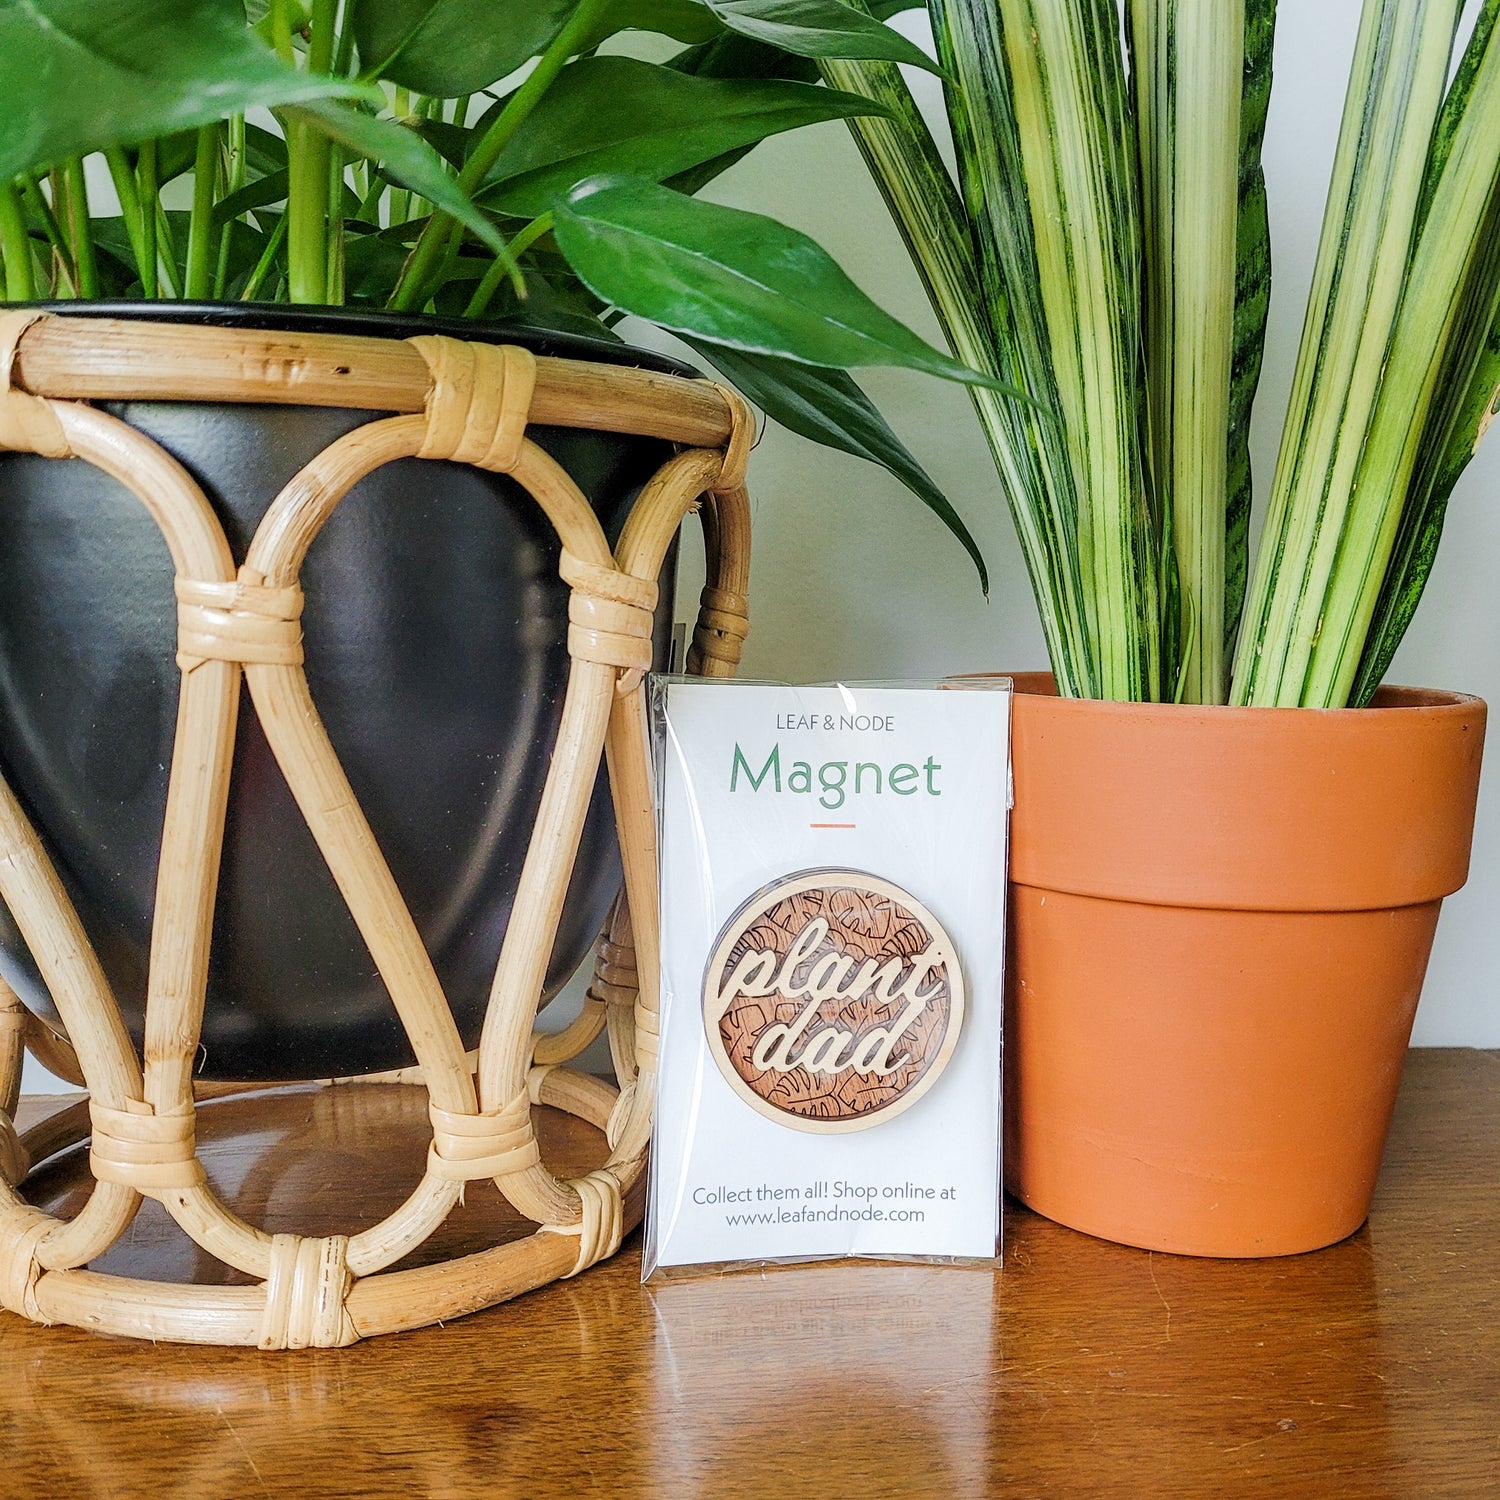 Handcrafted wooden magnet with the text "Plant Dad" cut from light colored wood on a darker wood background with an engraved monstera leaf pattern. Displayed in product packaging sitting on an end table with two houseplants.